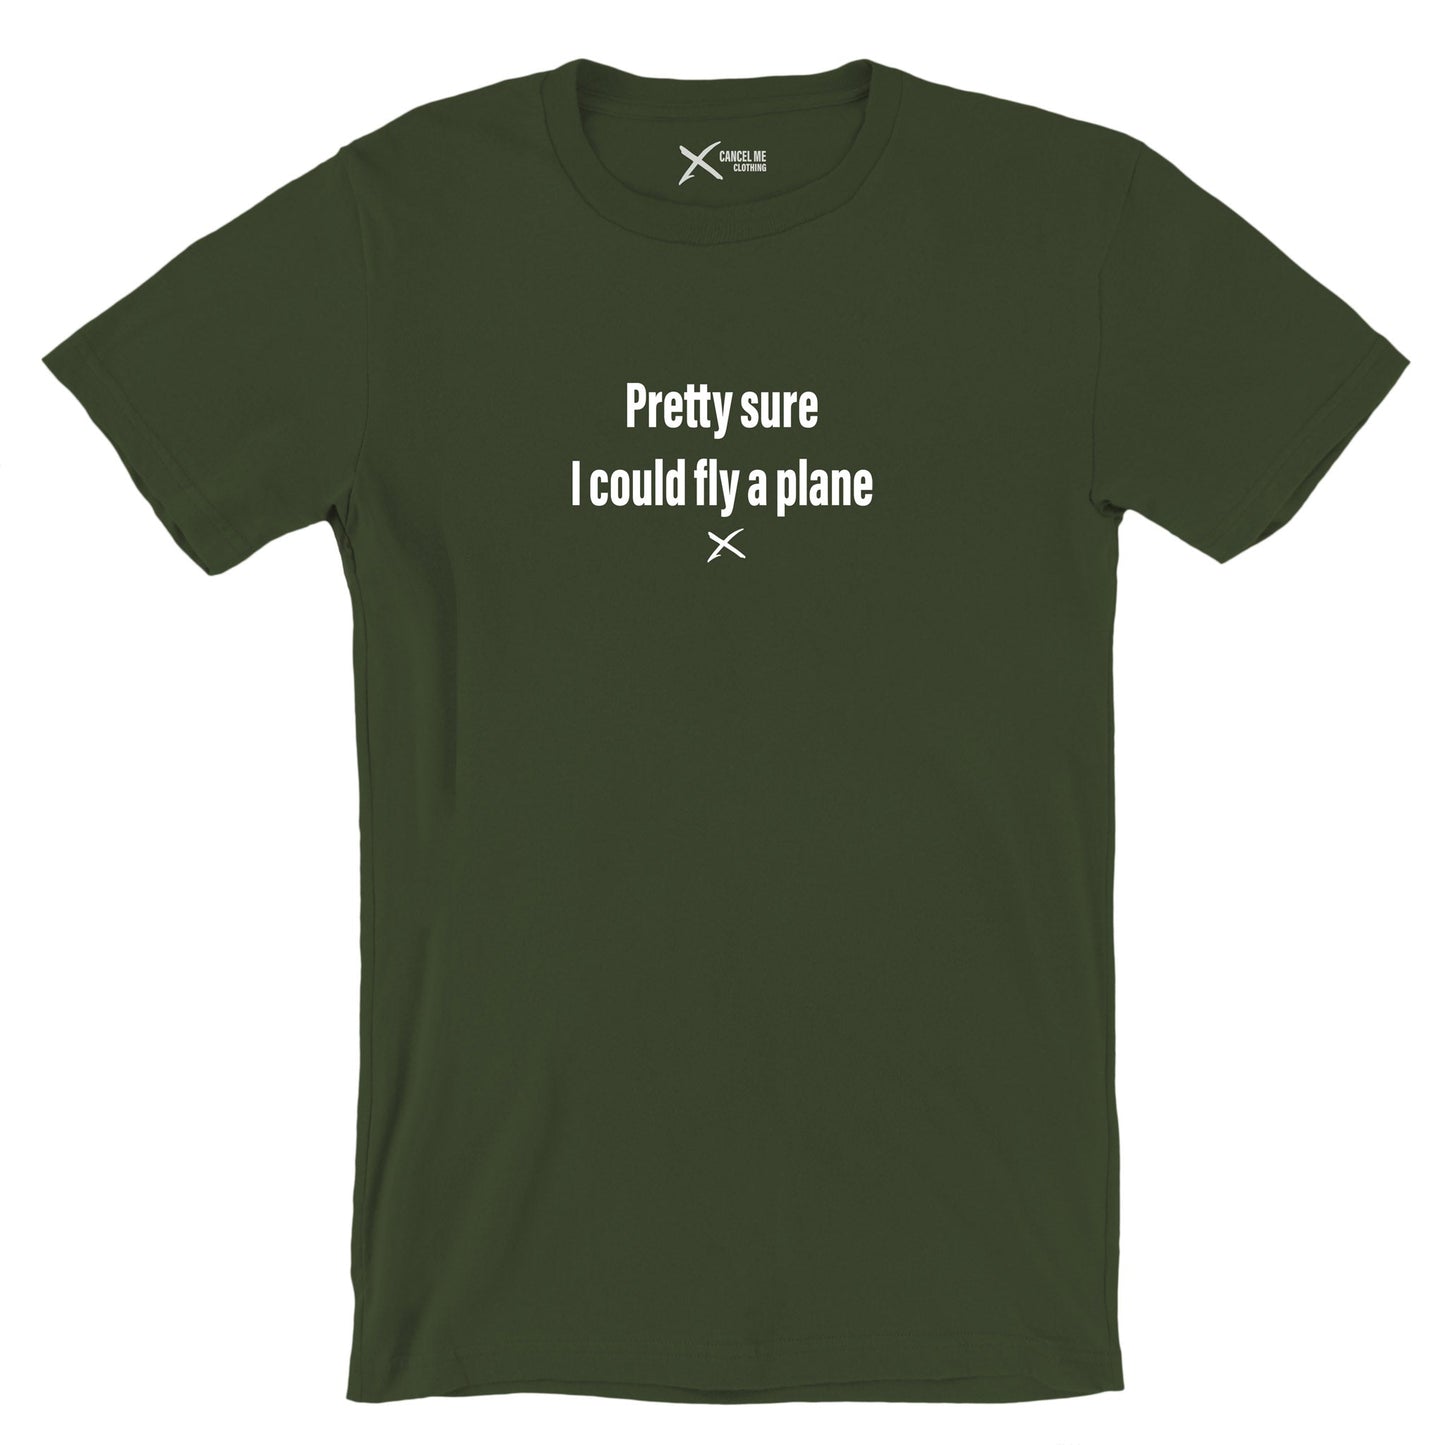 Pretty sure I could fly a plane - Shirt